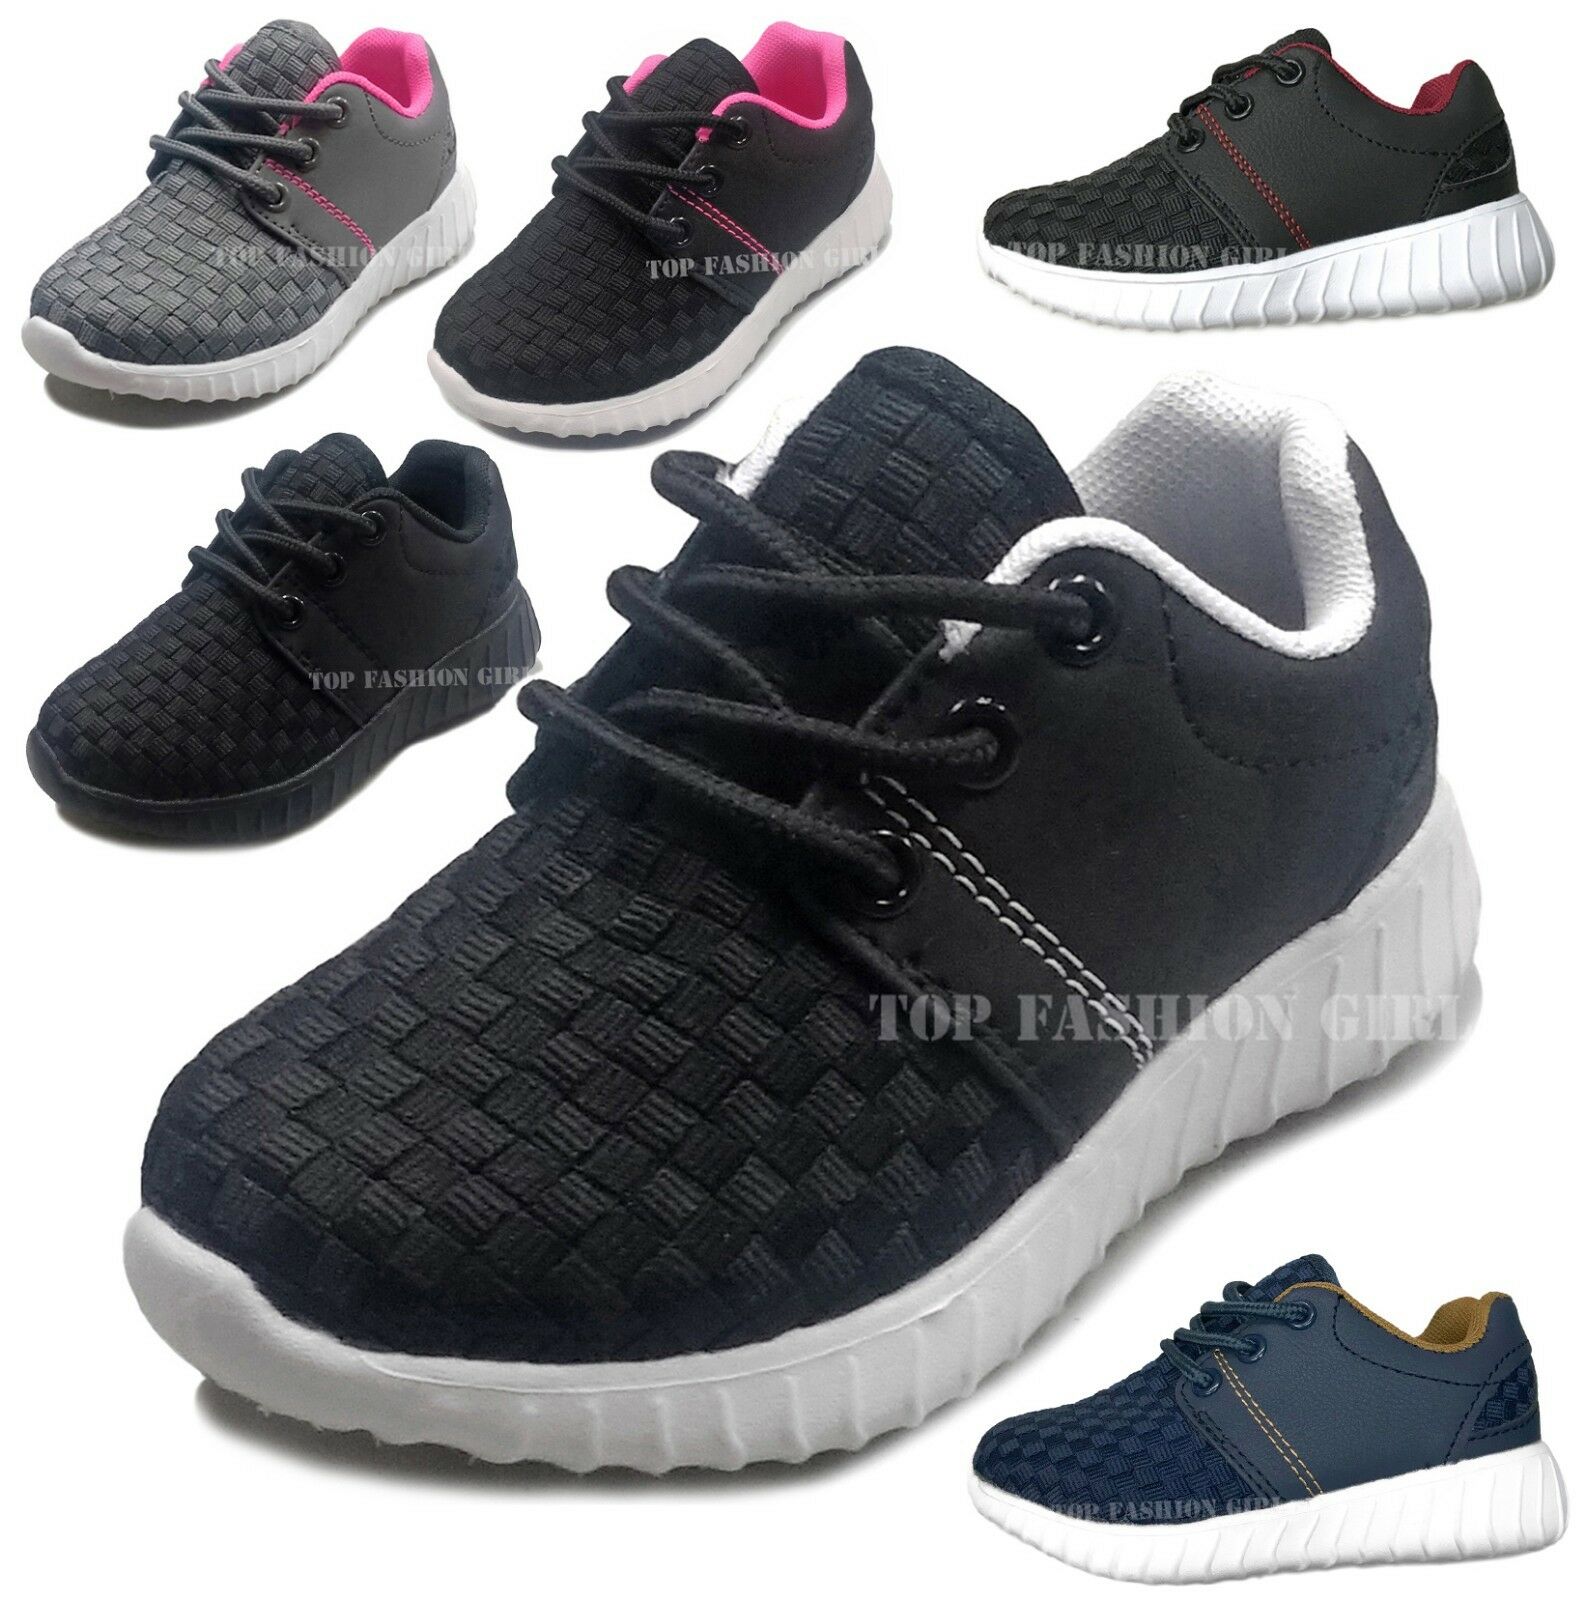 New Baby Boys Girls Toddler Mesh Sneaker Sporty Lace Up Tennis Shoe Size 4 To 9